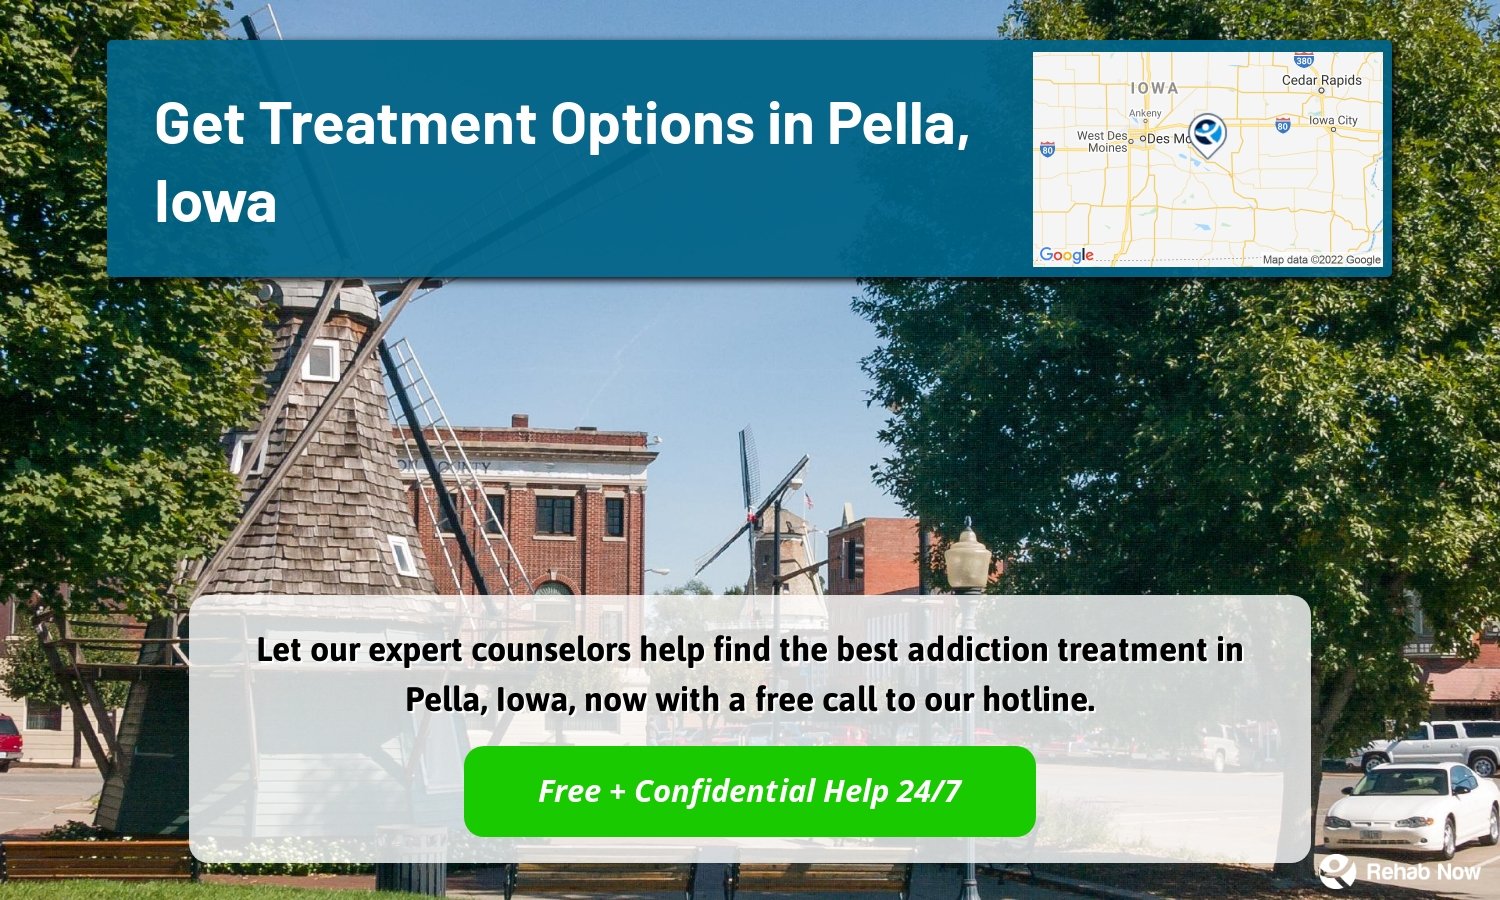 Let our expert counselors help find the best addiction treatment in Pella, Iowa, now with a free call to our hotline.